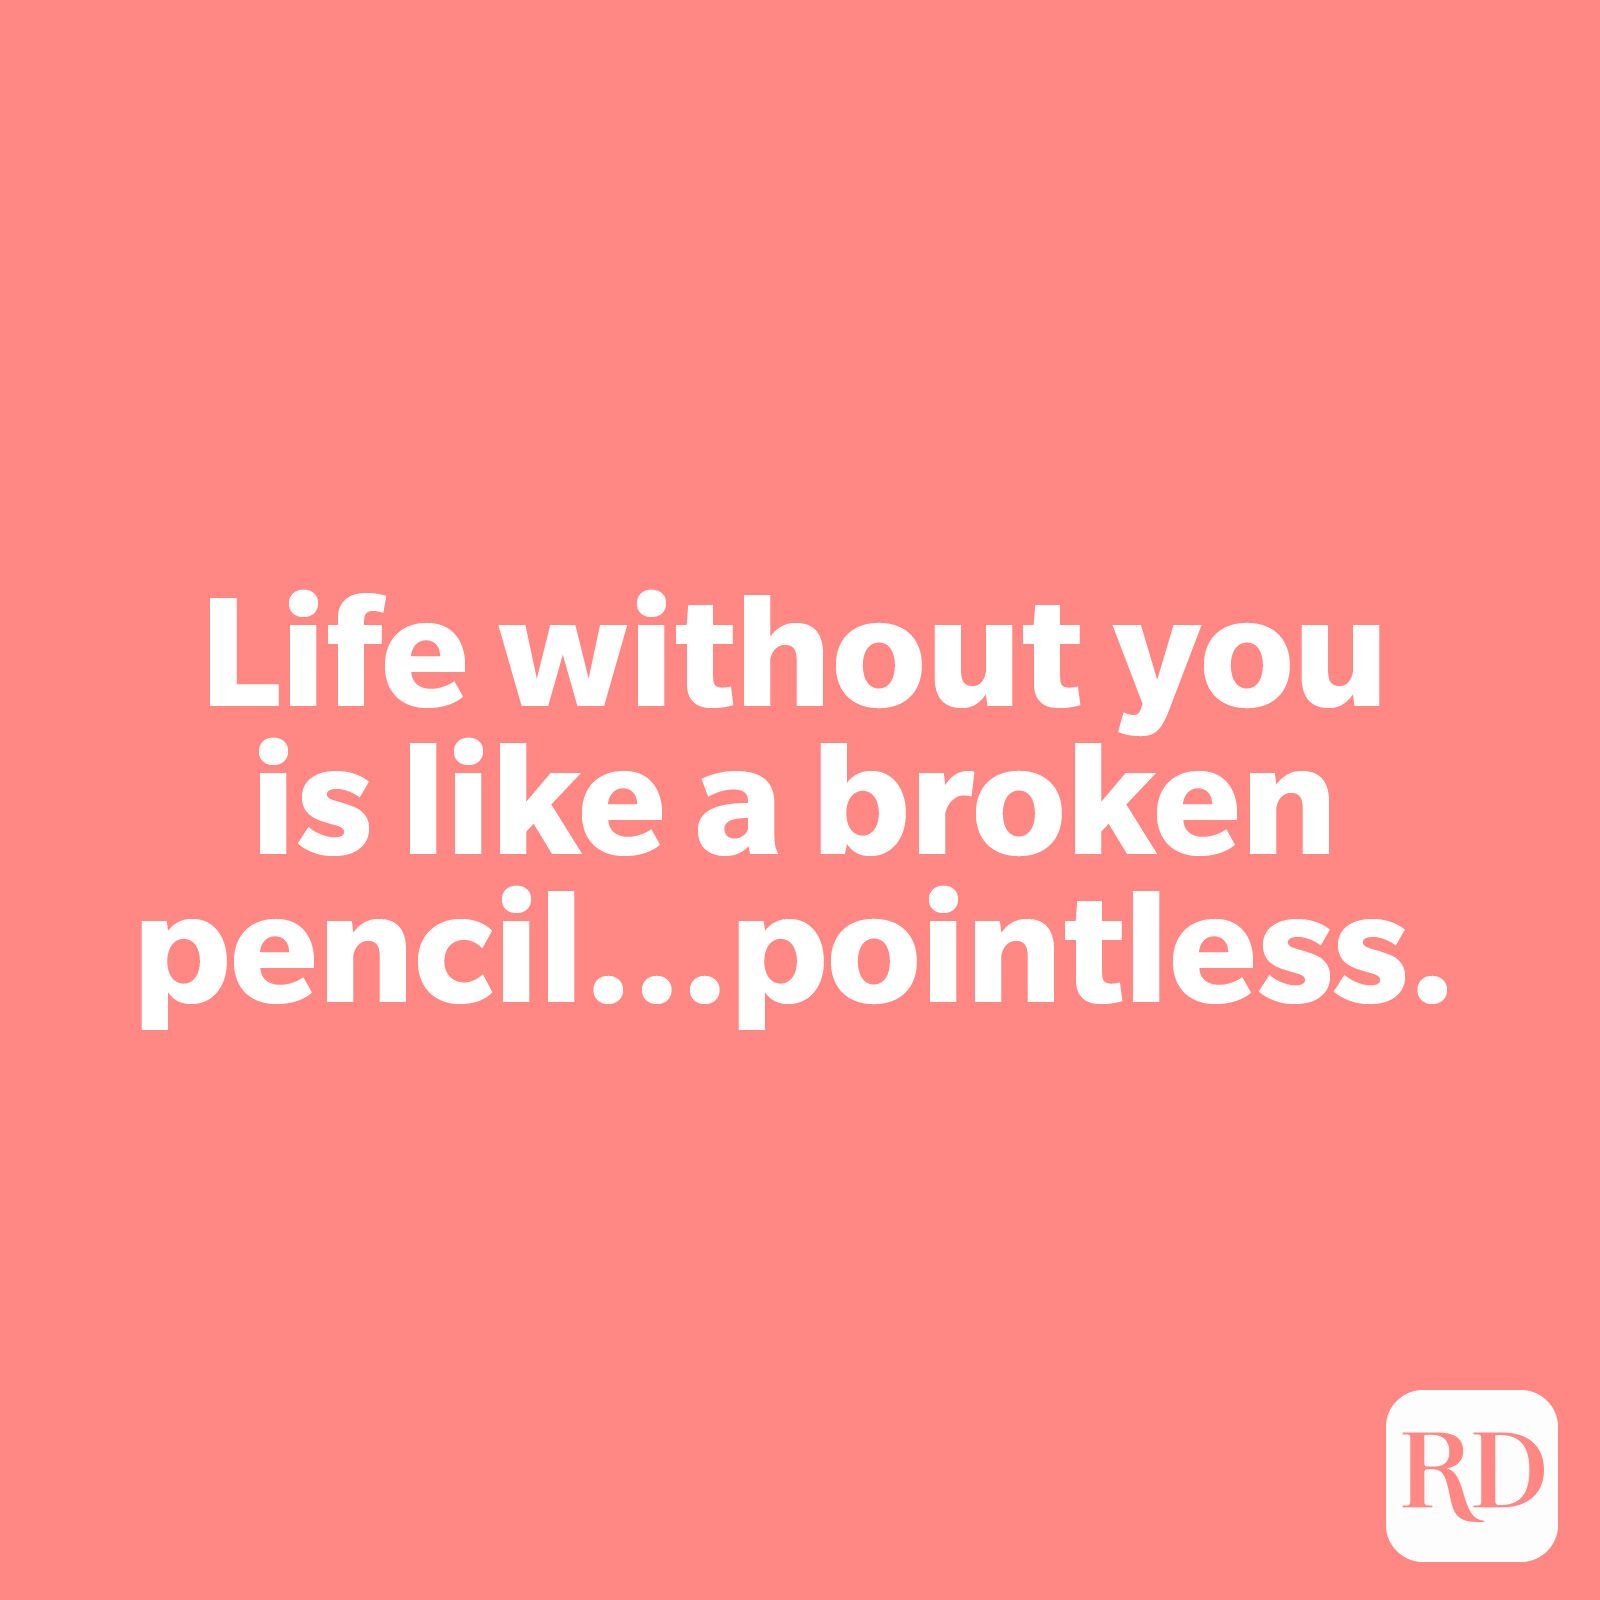 Life without you is like a broken pencil…pointless.